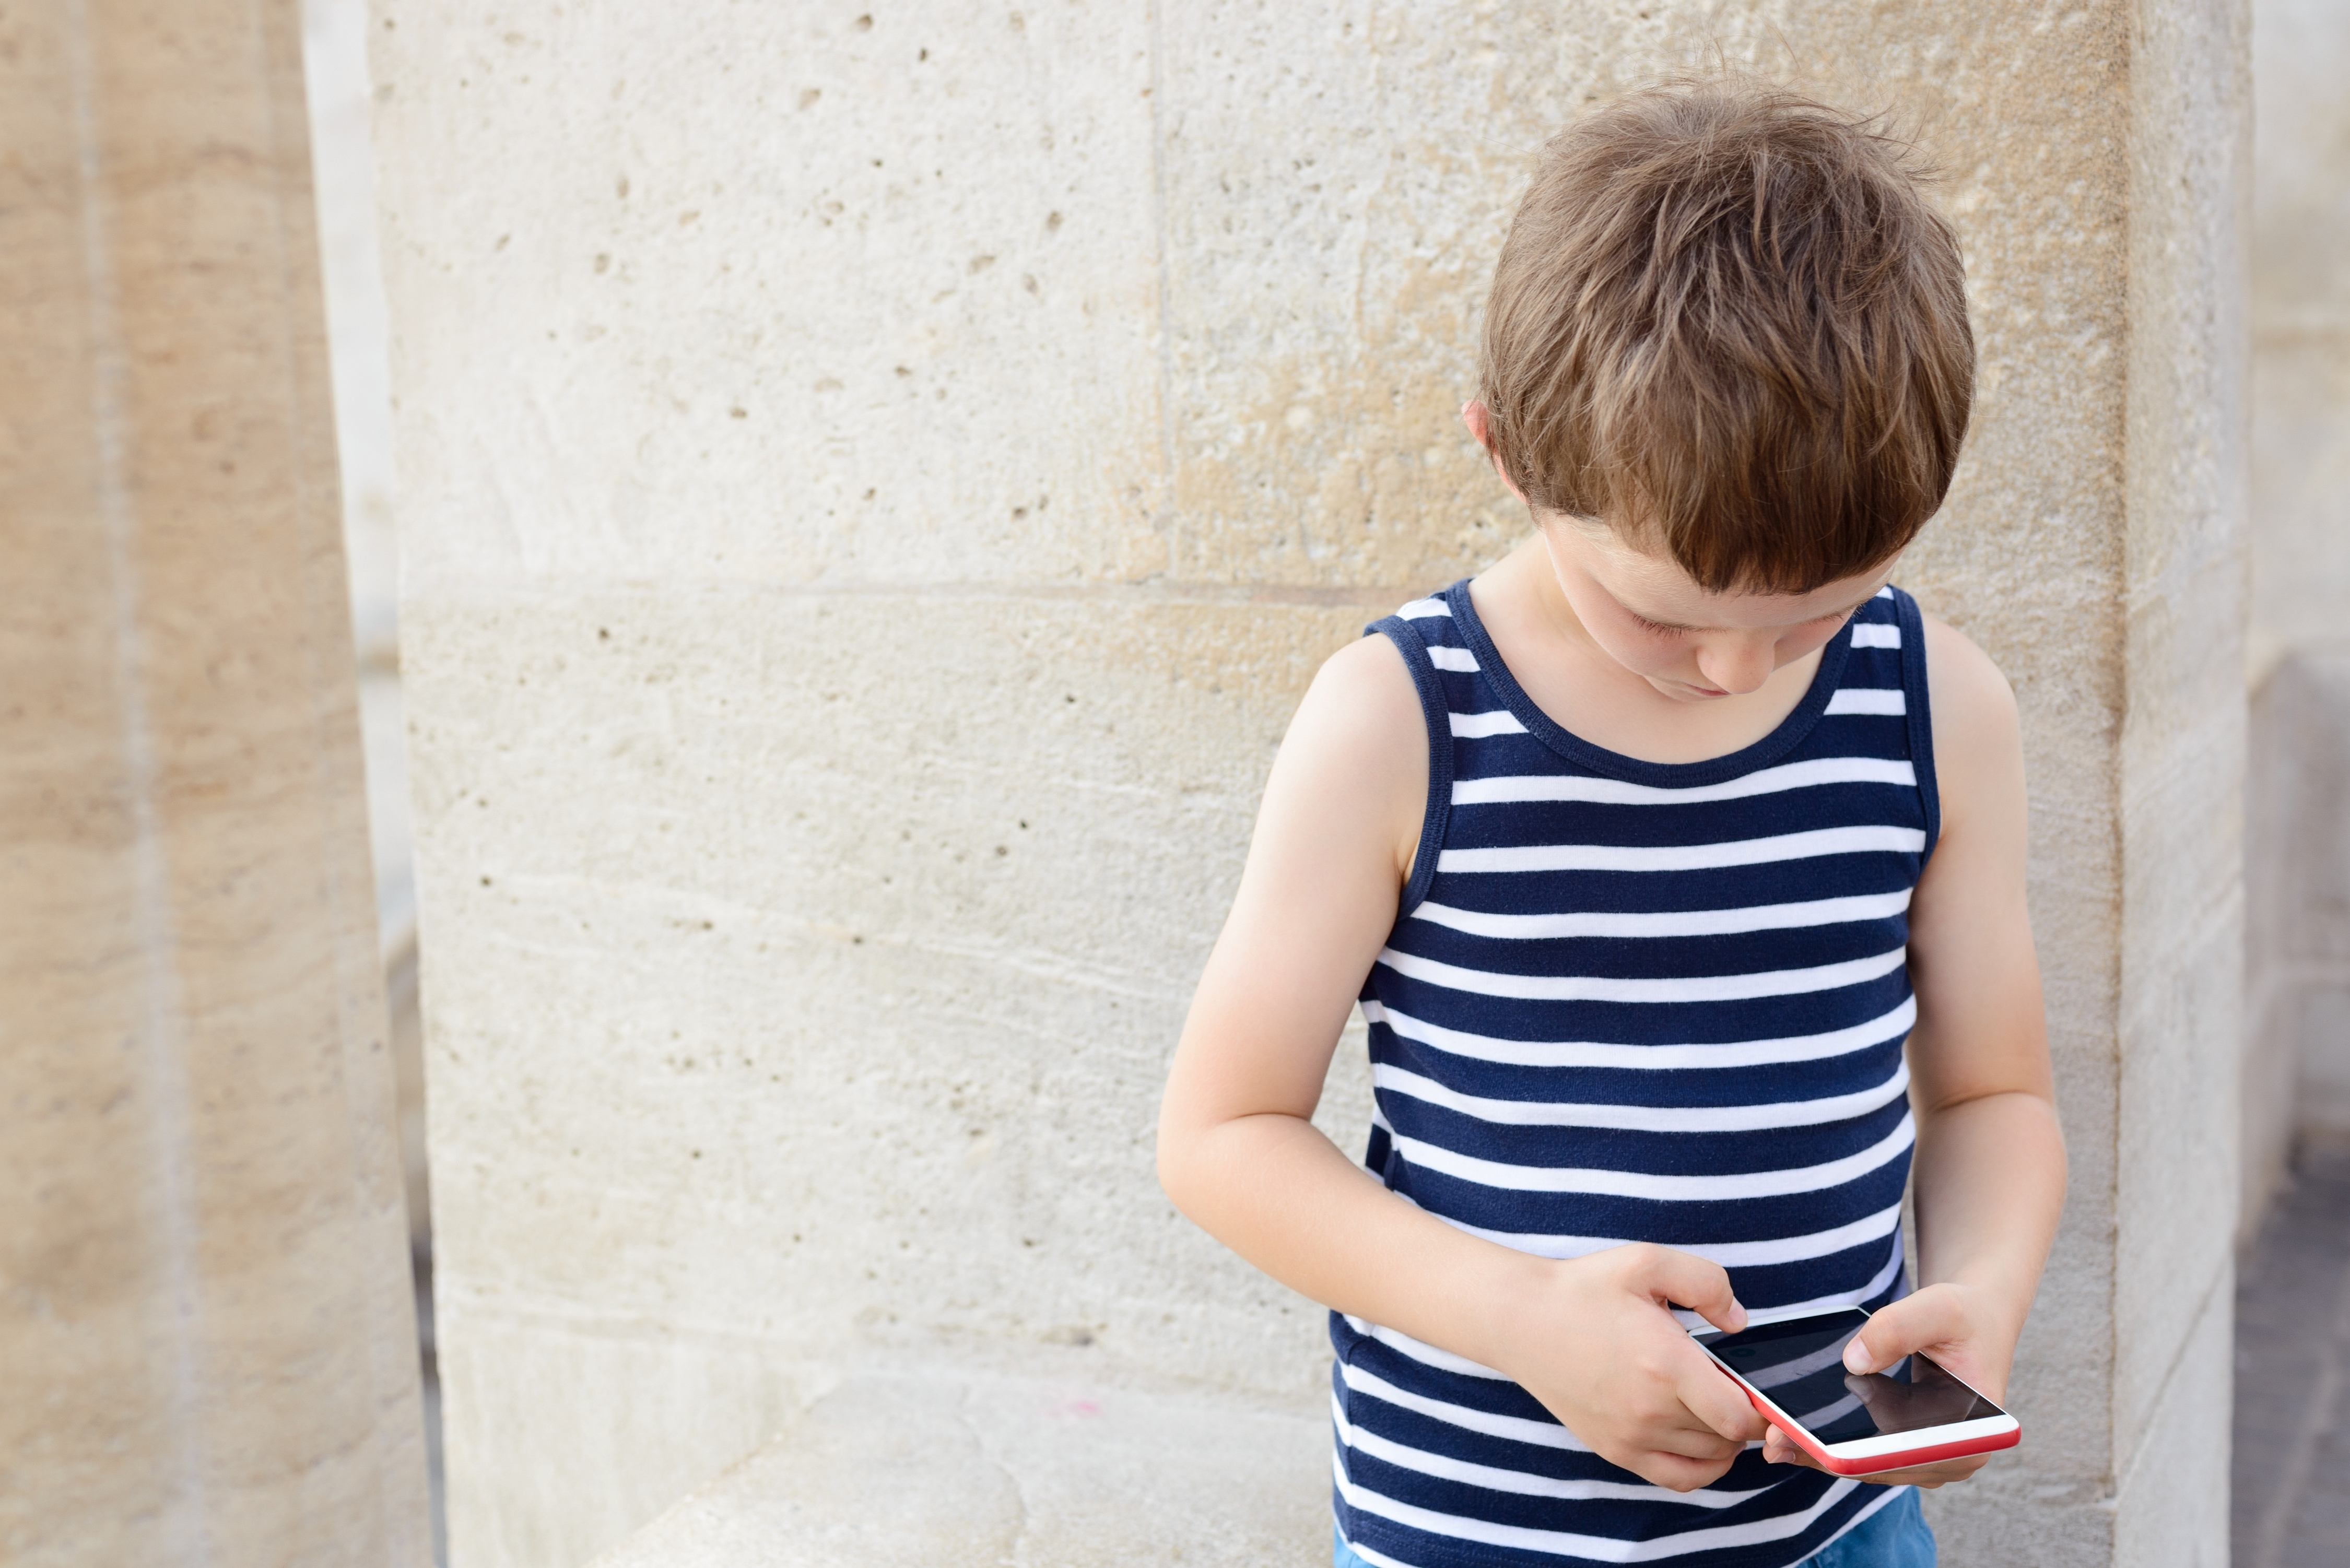 Little boy with the phone | Source: Shutterstock.com